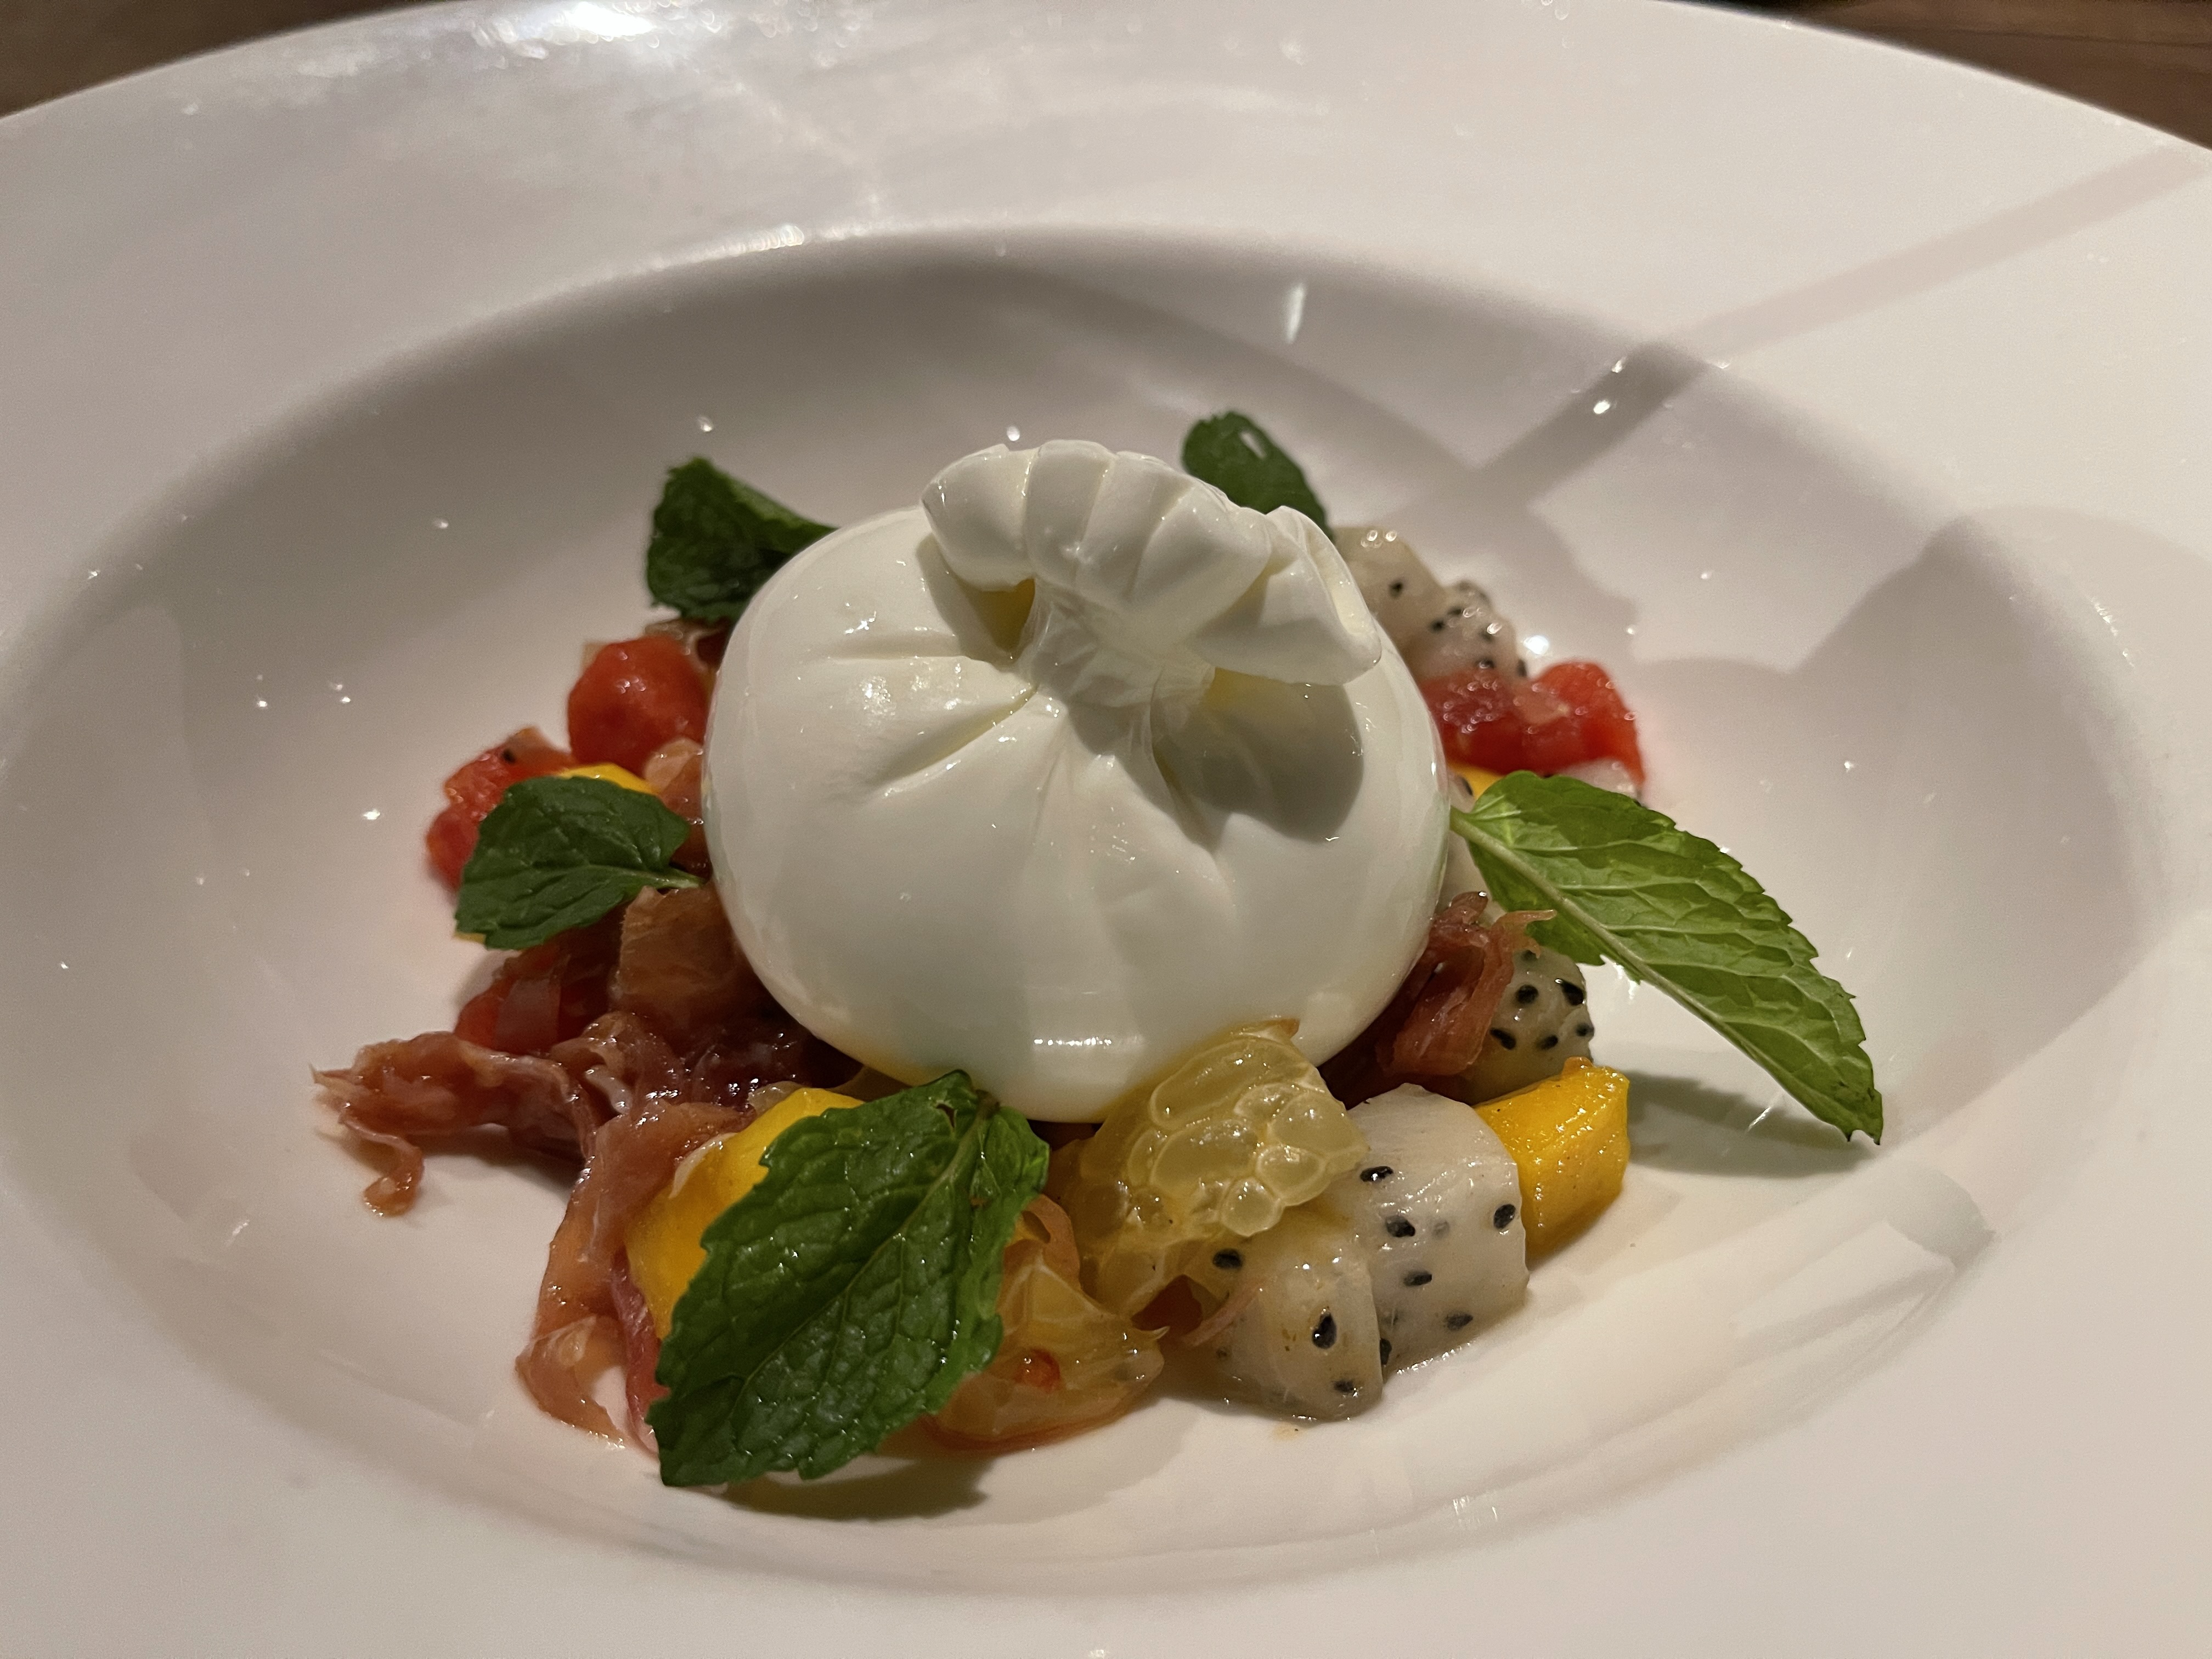 The signature fruit salad with house-made burrata is served at a Pizza 4P's restaurant in District 3, Ho Chi Minh City. Photo: Dong Nguyen / Tuoi Tre News